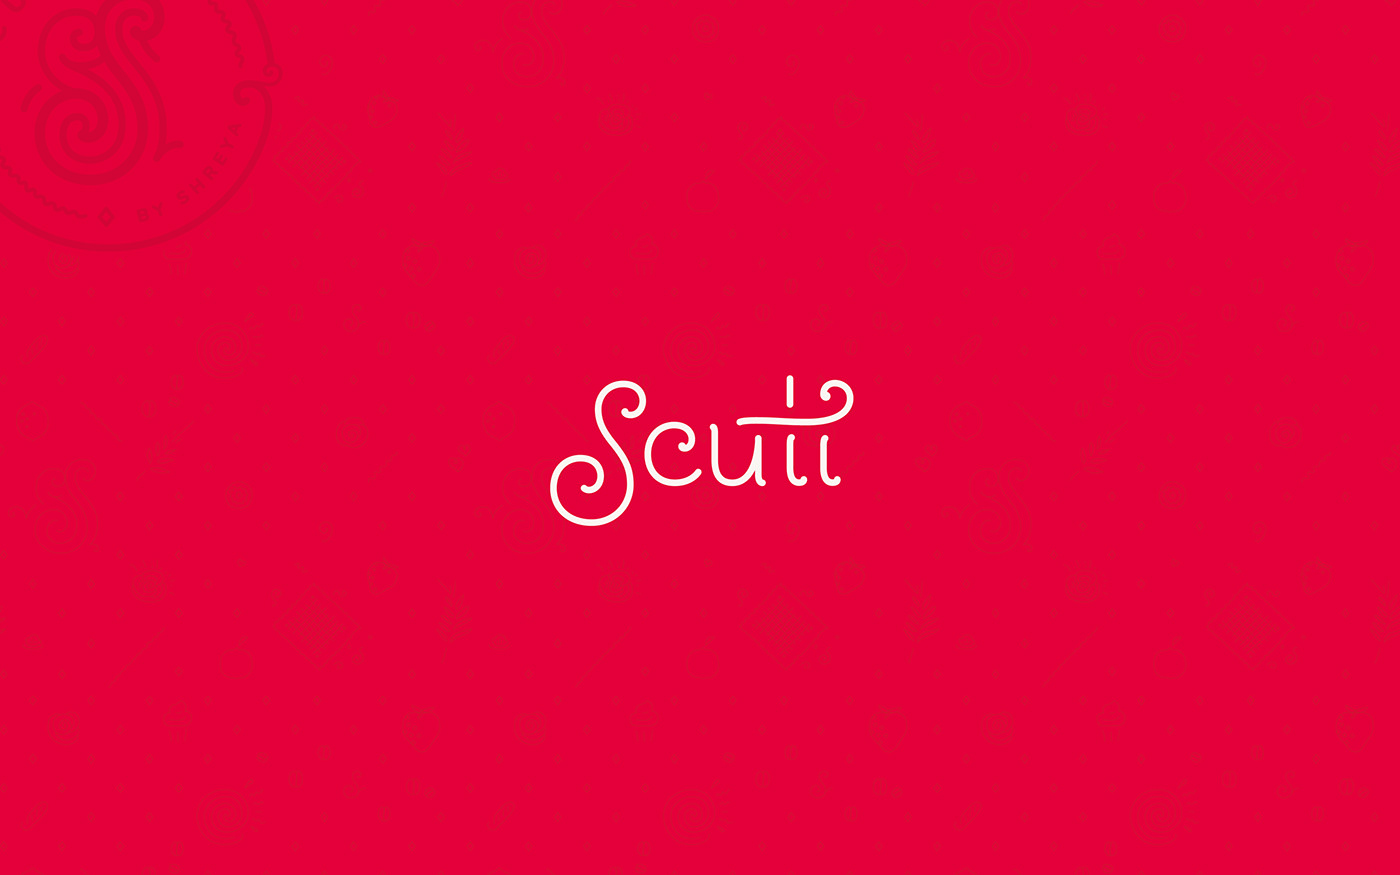 scuti chocolates bakery gourmet desserts sweet cookies Food product indian Culinary food love